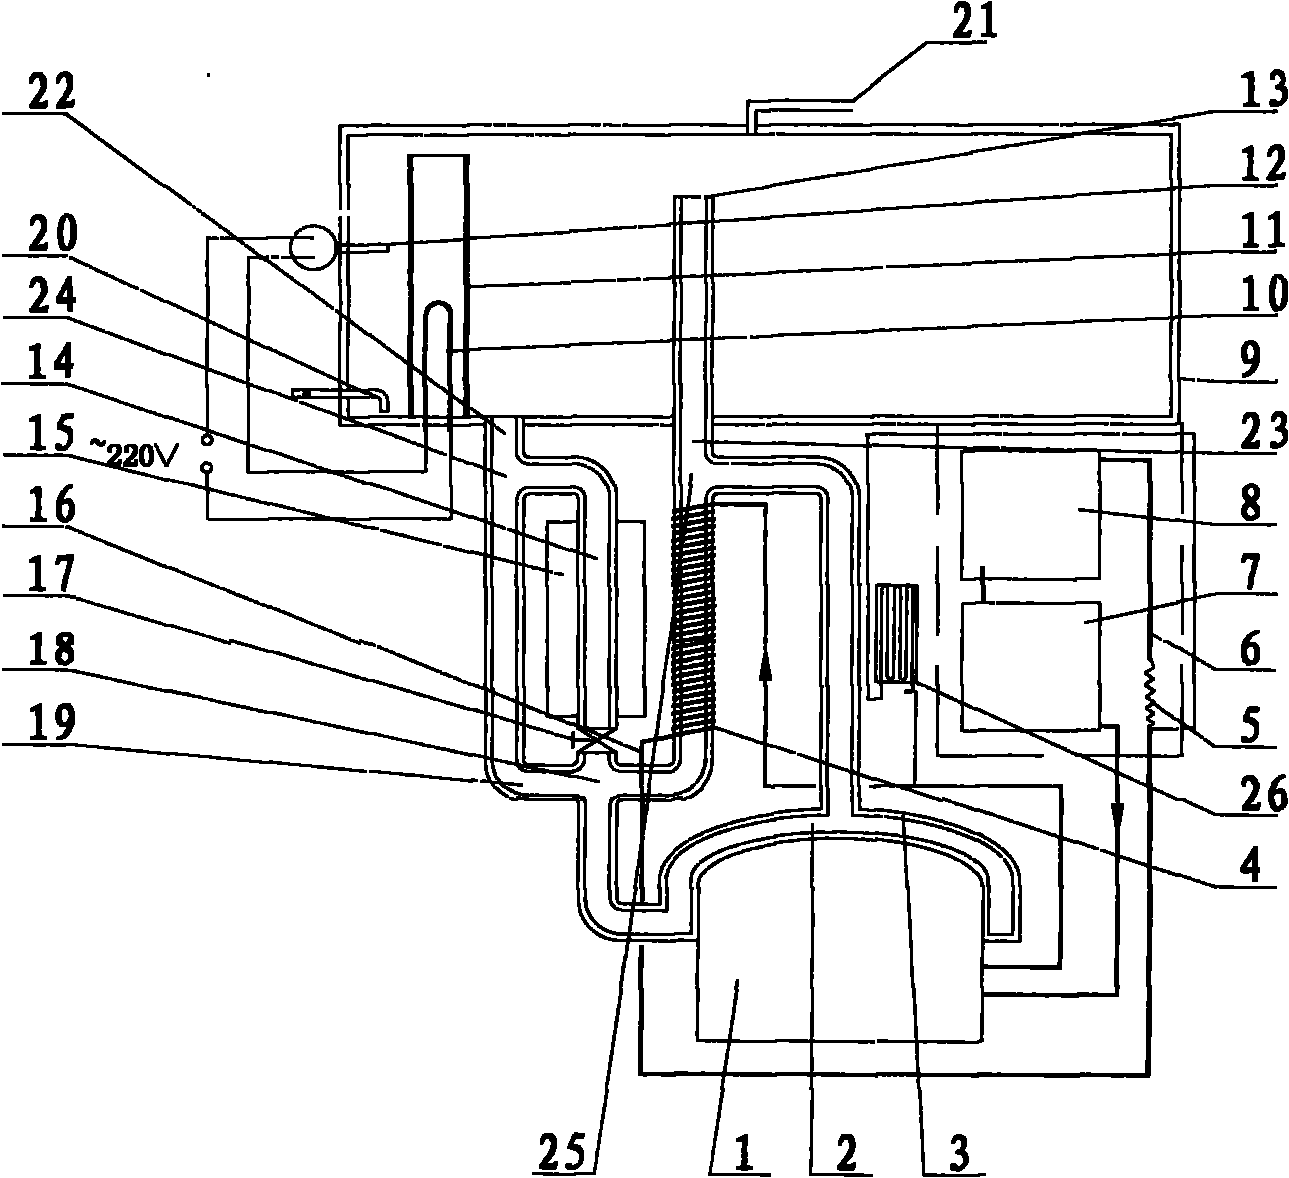 Machine with dual purposes of refrigerator and water heater